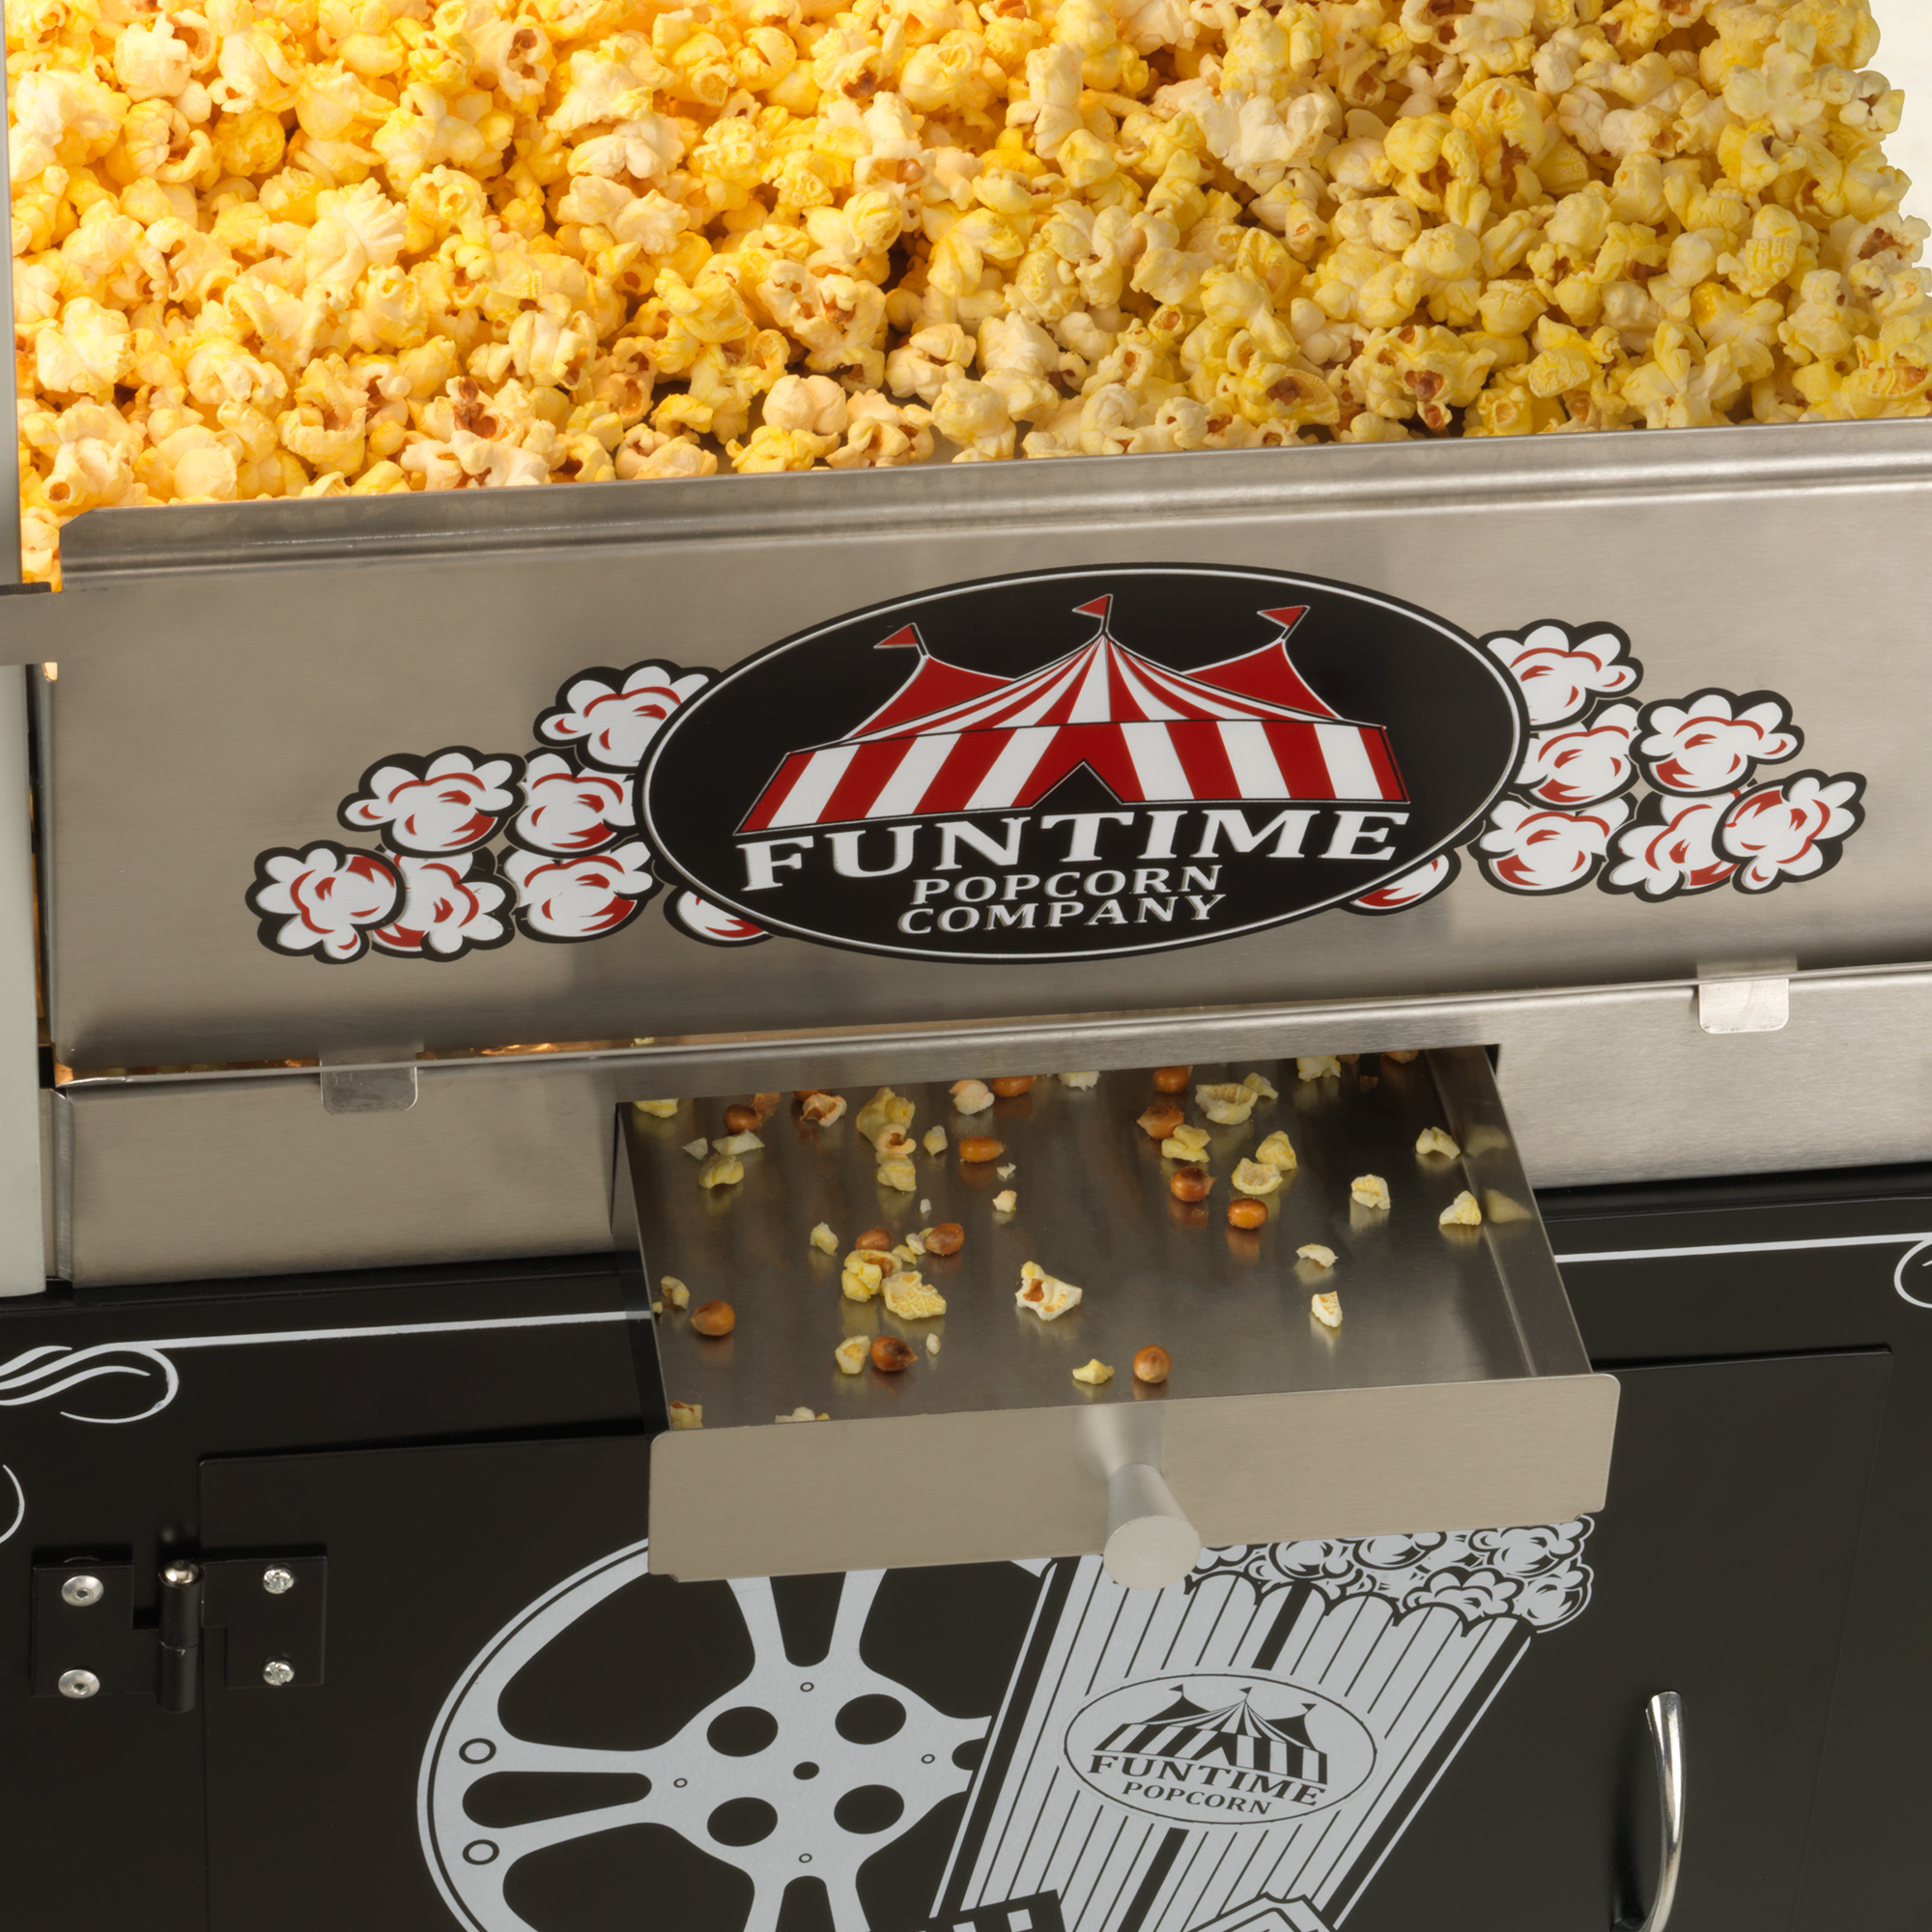 Funtime Palace 16 oz. Hot Oil Stainless Steel Popcorn Popper